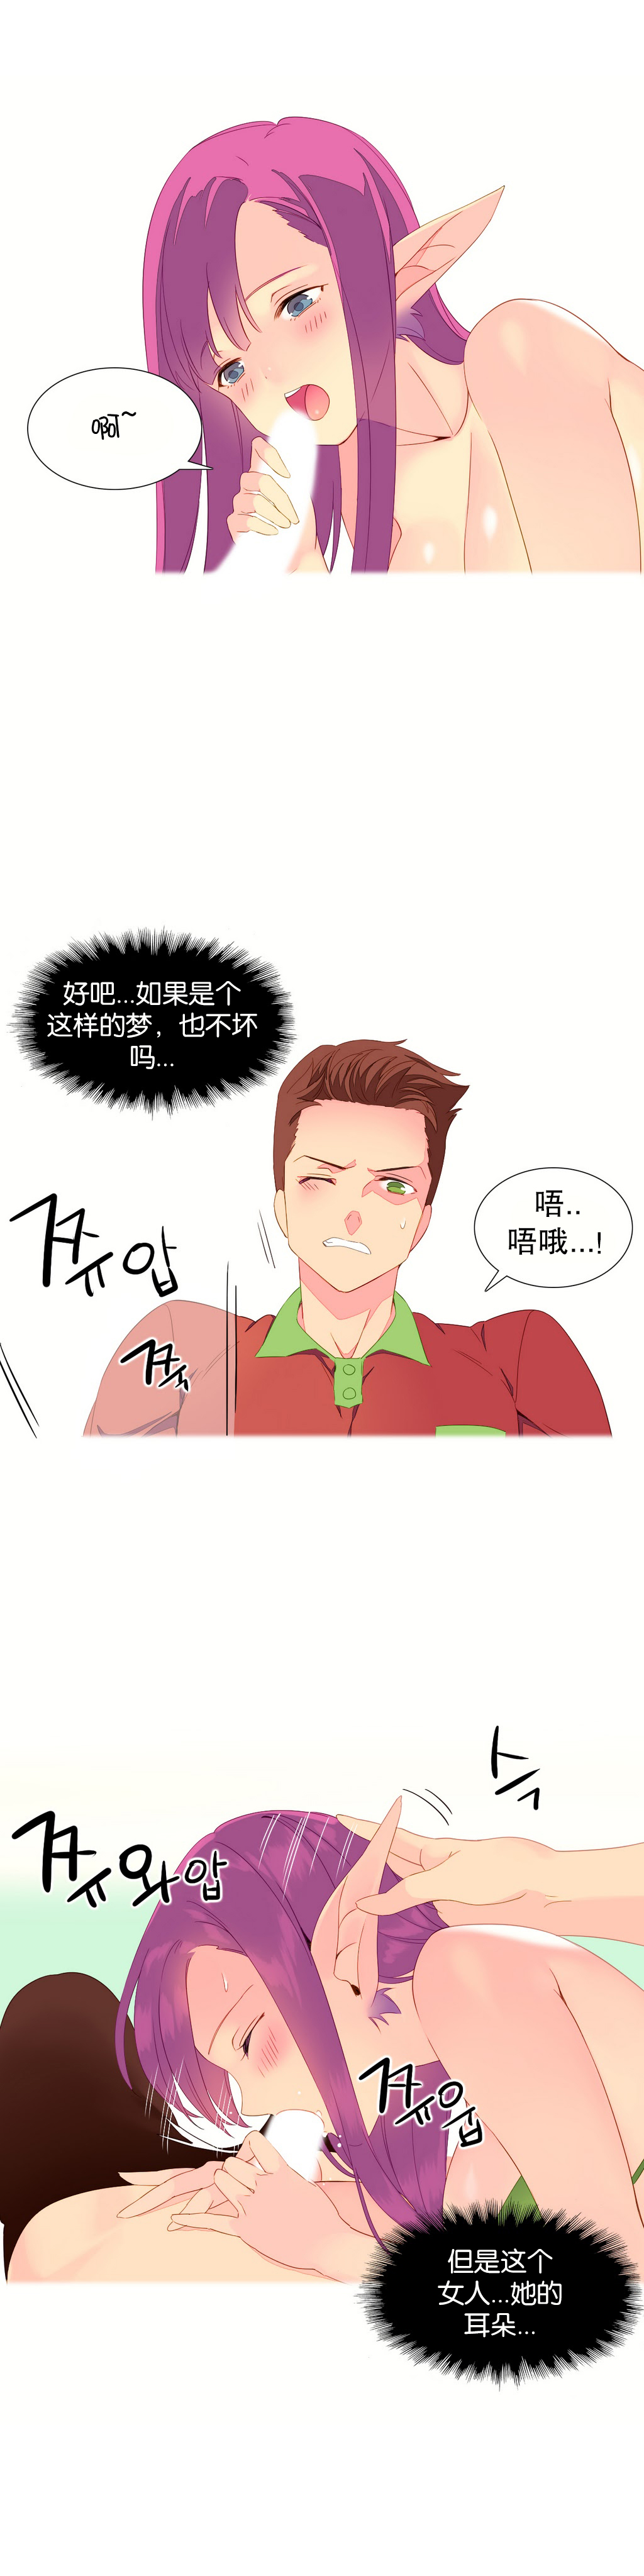 [Rozer] 我统治的世界(A World that I Rule) Ch.1-16 [Chinese] page 47 full